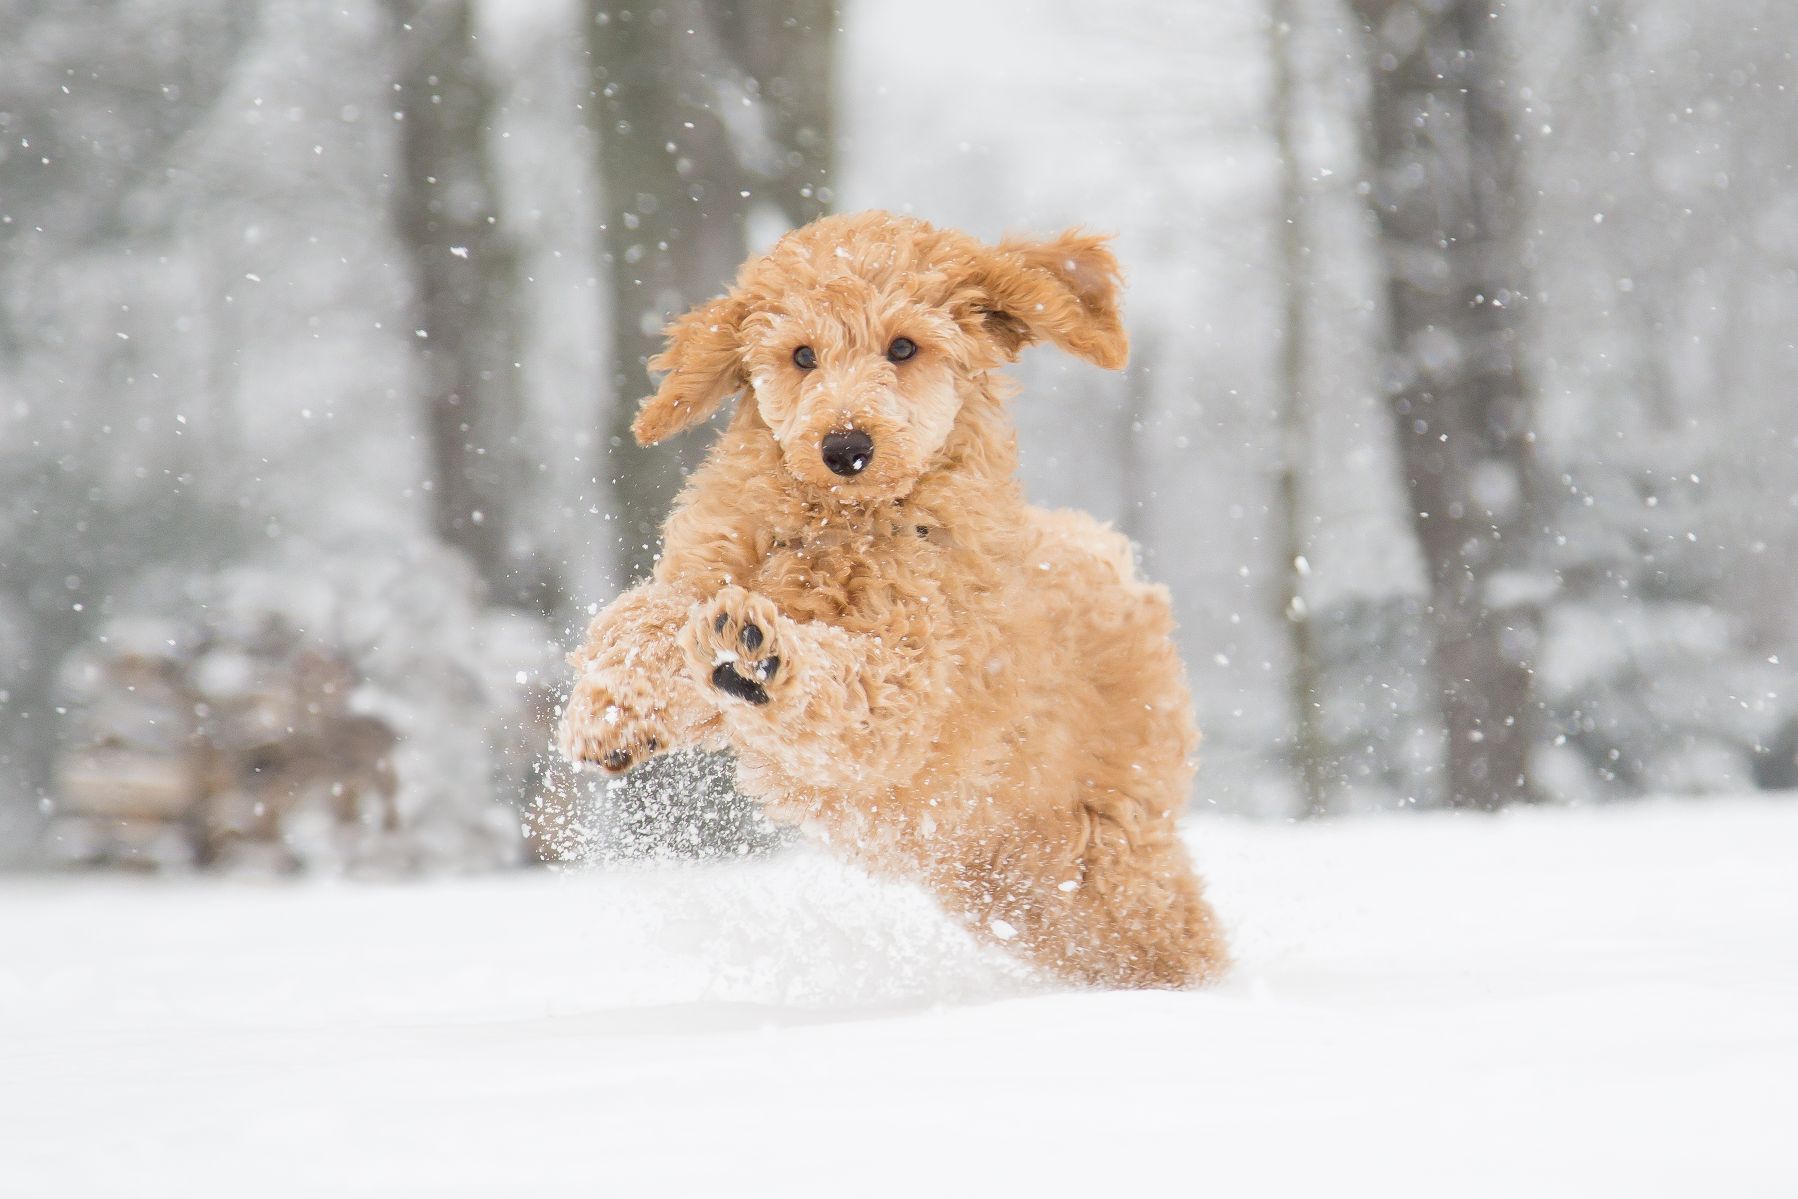 A poodle puppy playing in snow